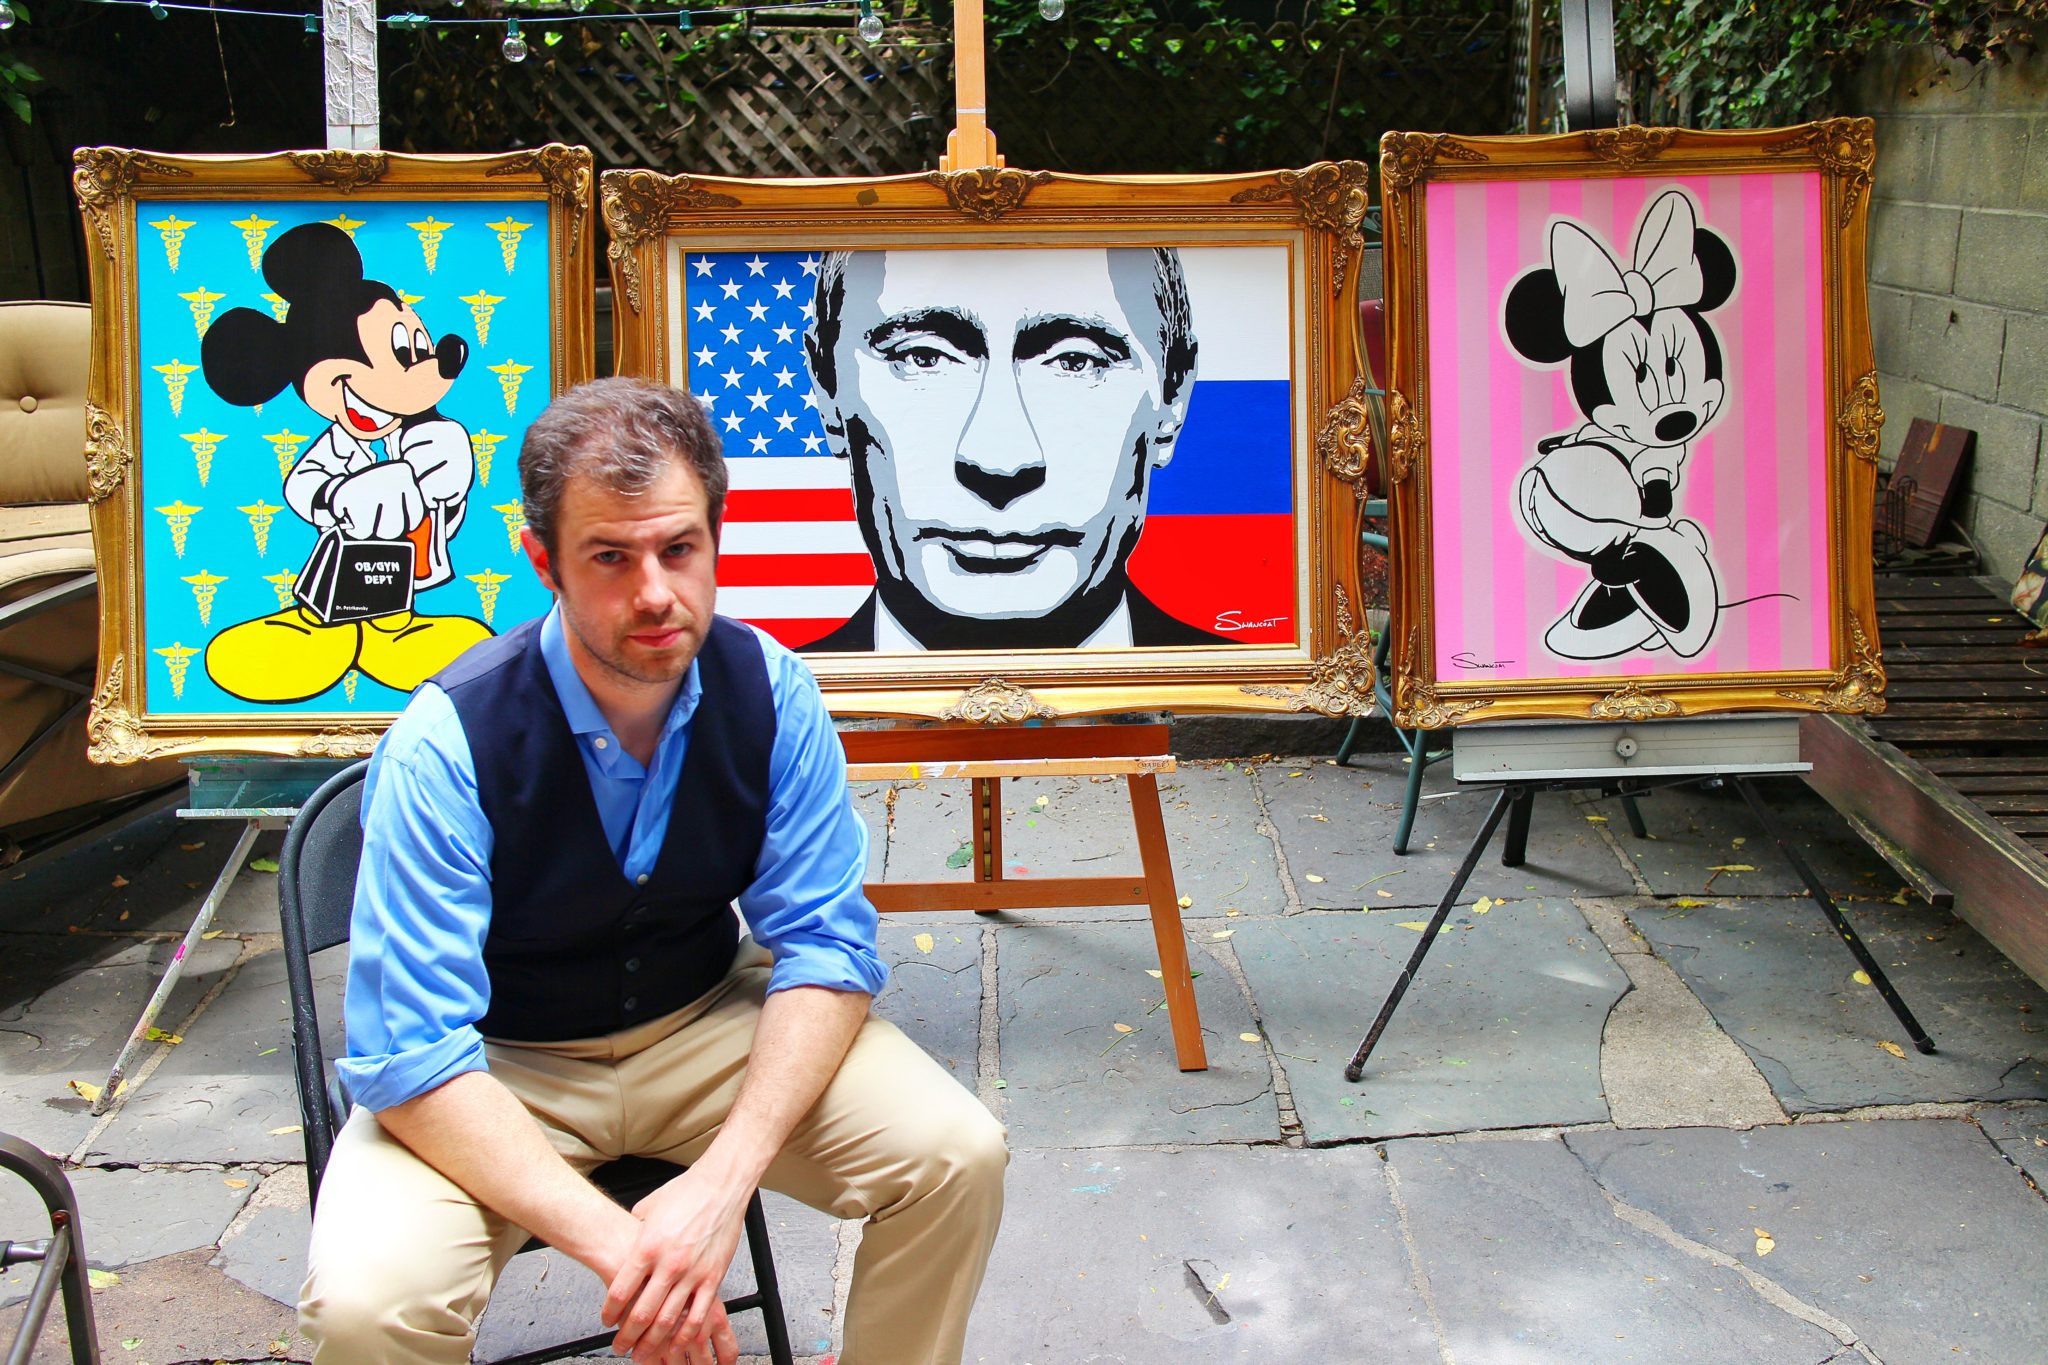 Dr. Steven Swancoat to Show Works Commissioned by Russian President Vladimir Putin at Wynwood Lab during Art Basel